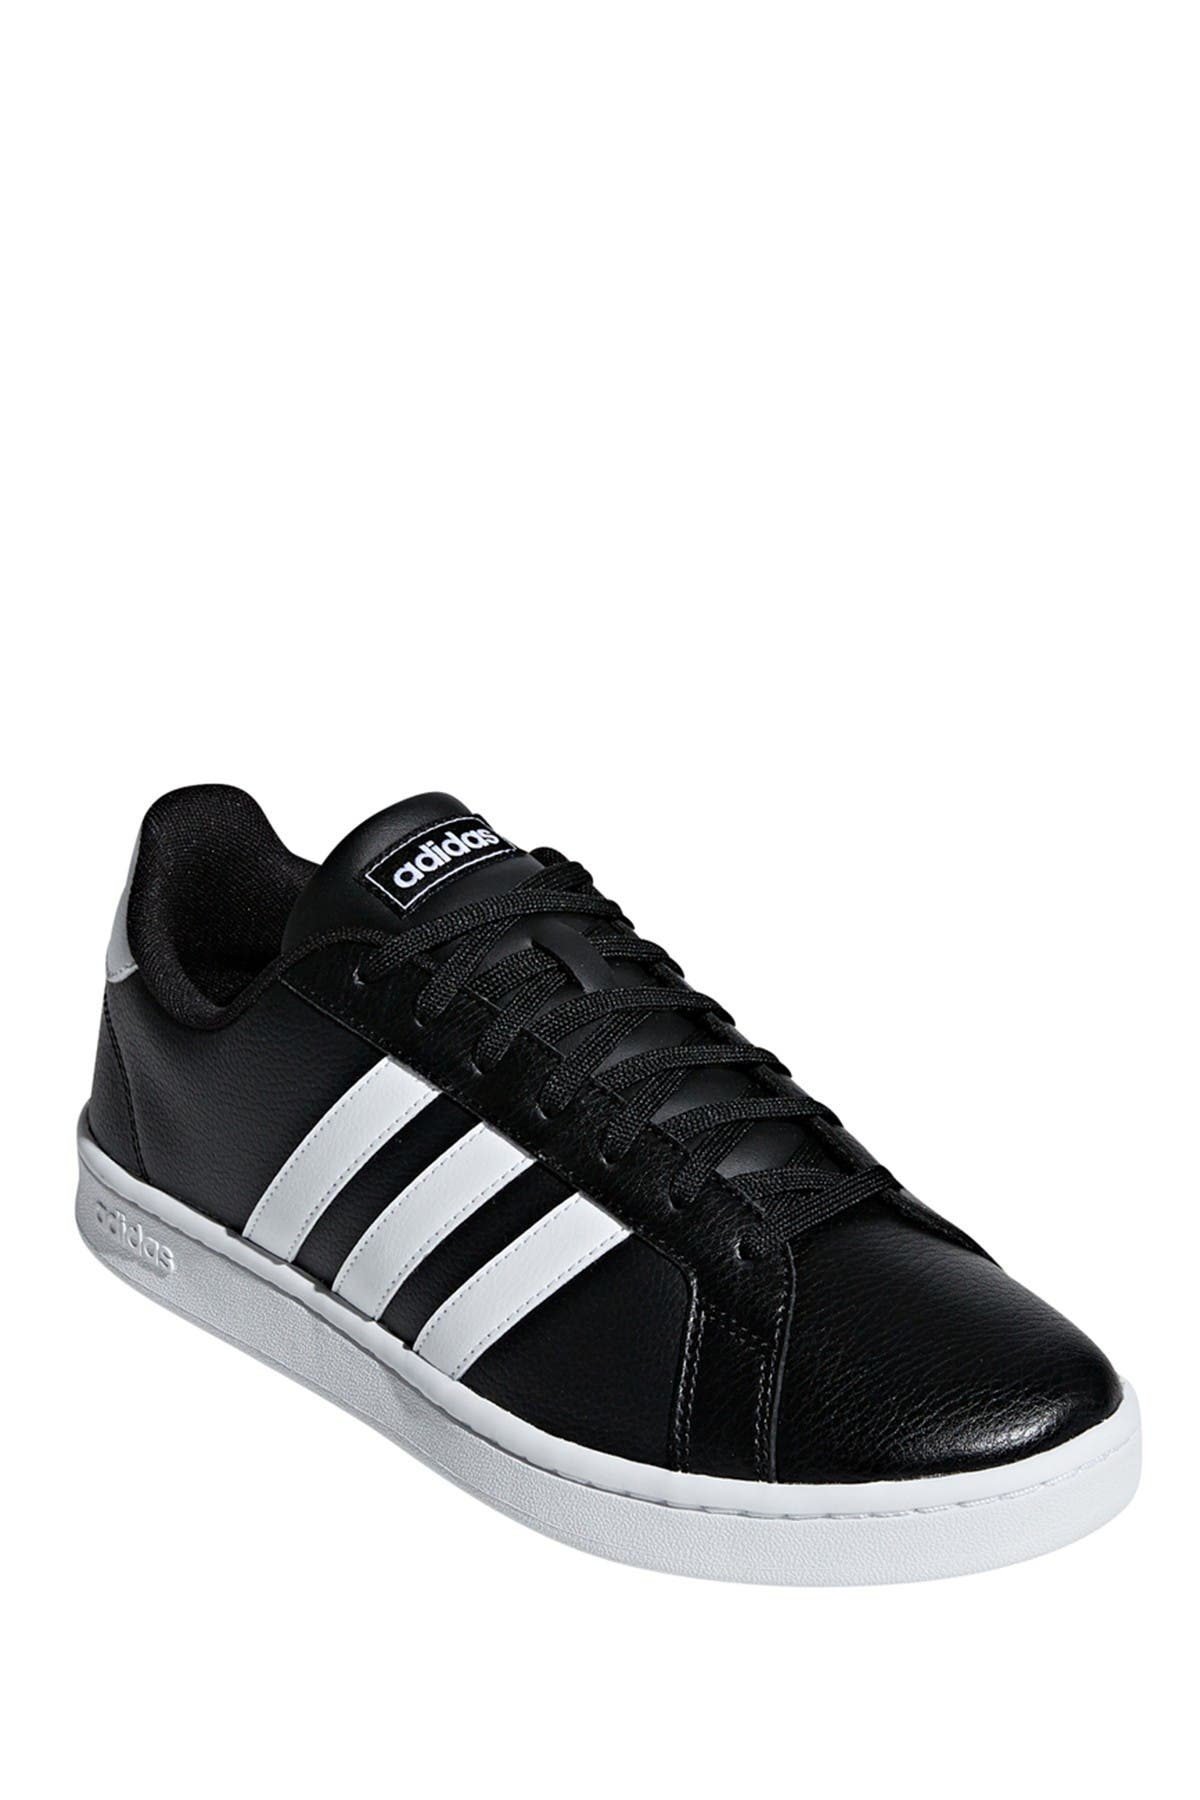 nordstrom adidas mens shoes